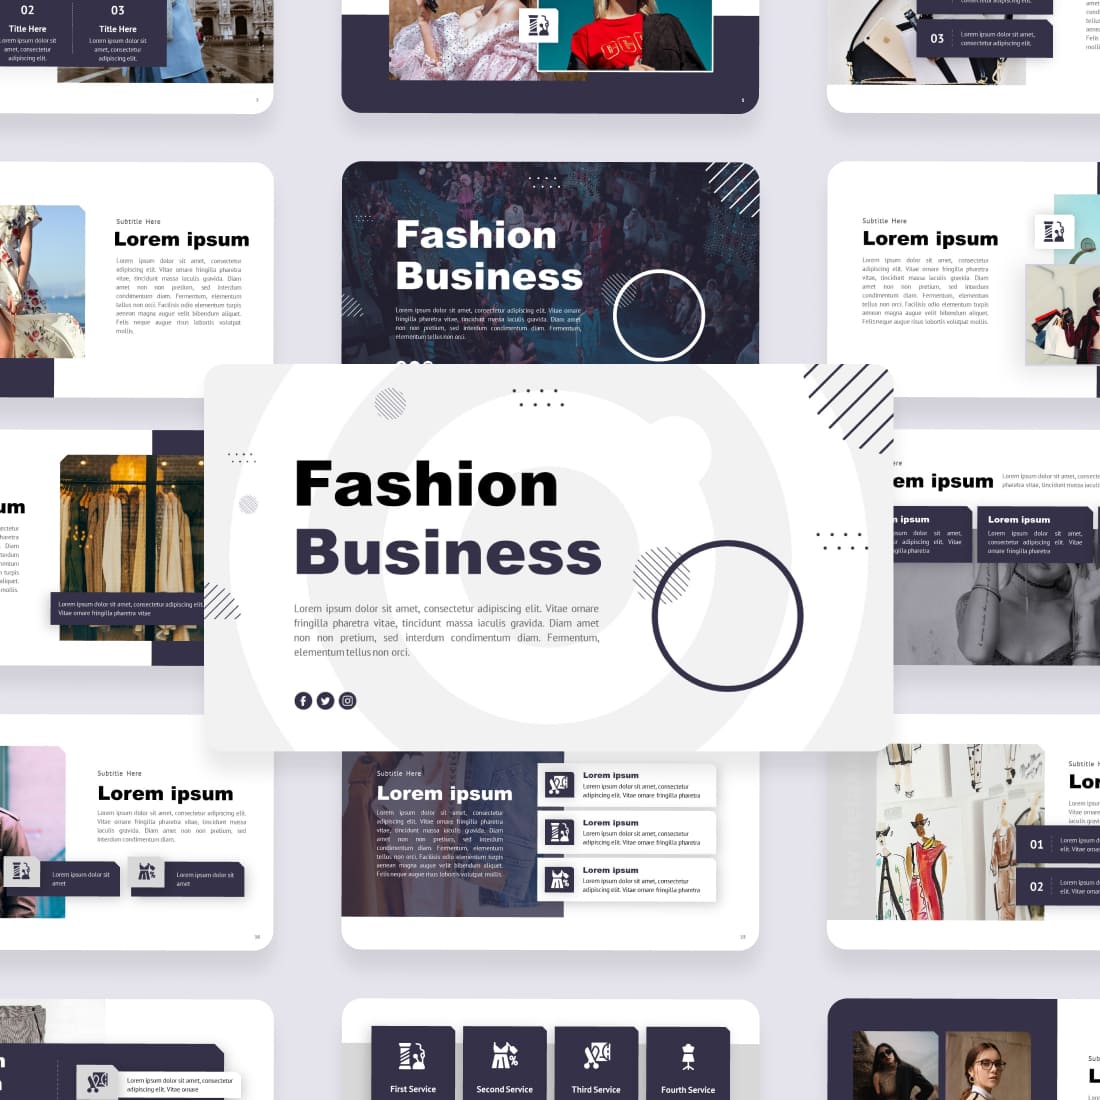 Fashion Business Keynote Template cover.